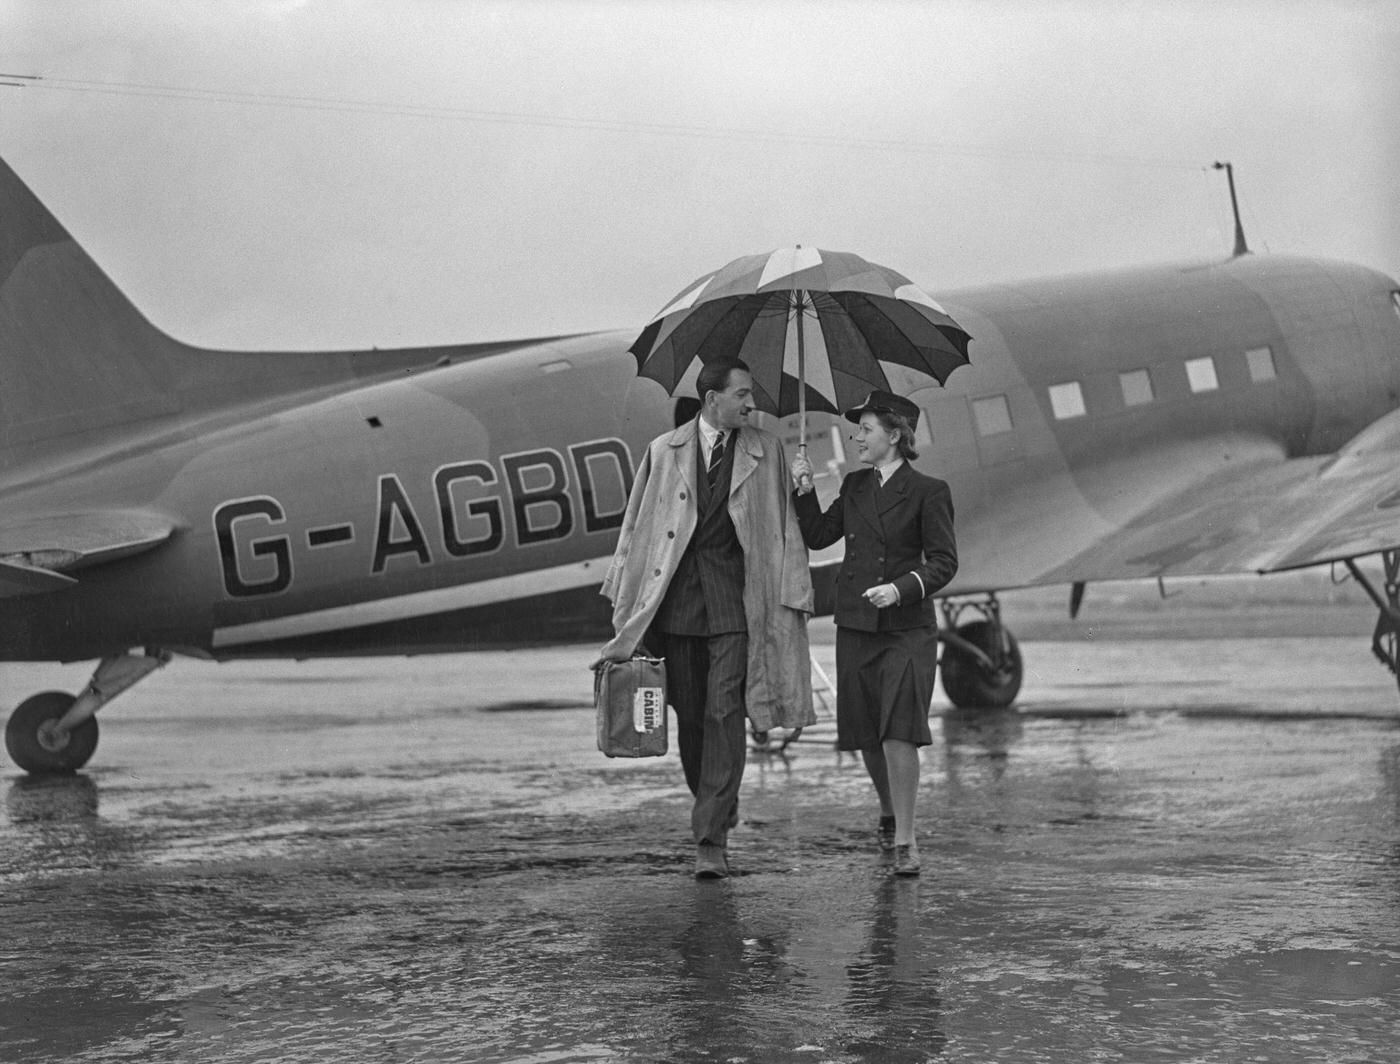 A female travel clerk with a large umbrella provides shelter for a passenger arriving during heavy rain on an incoming British Overseas Airways Corporation (BOAC) flight at an airport in England.